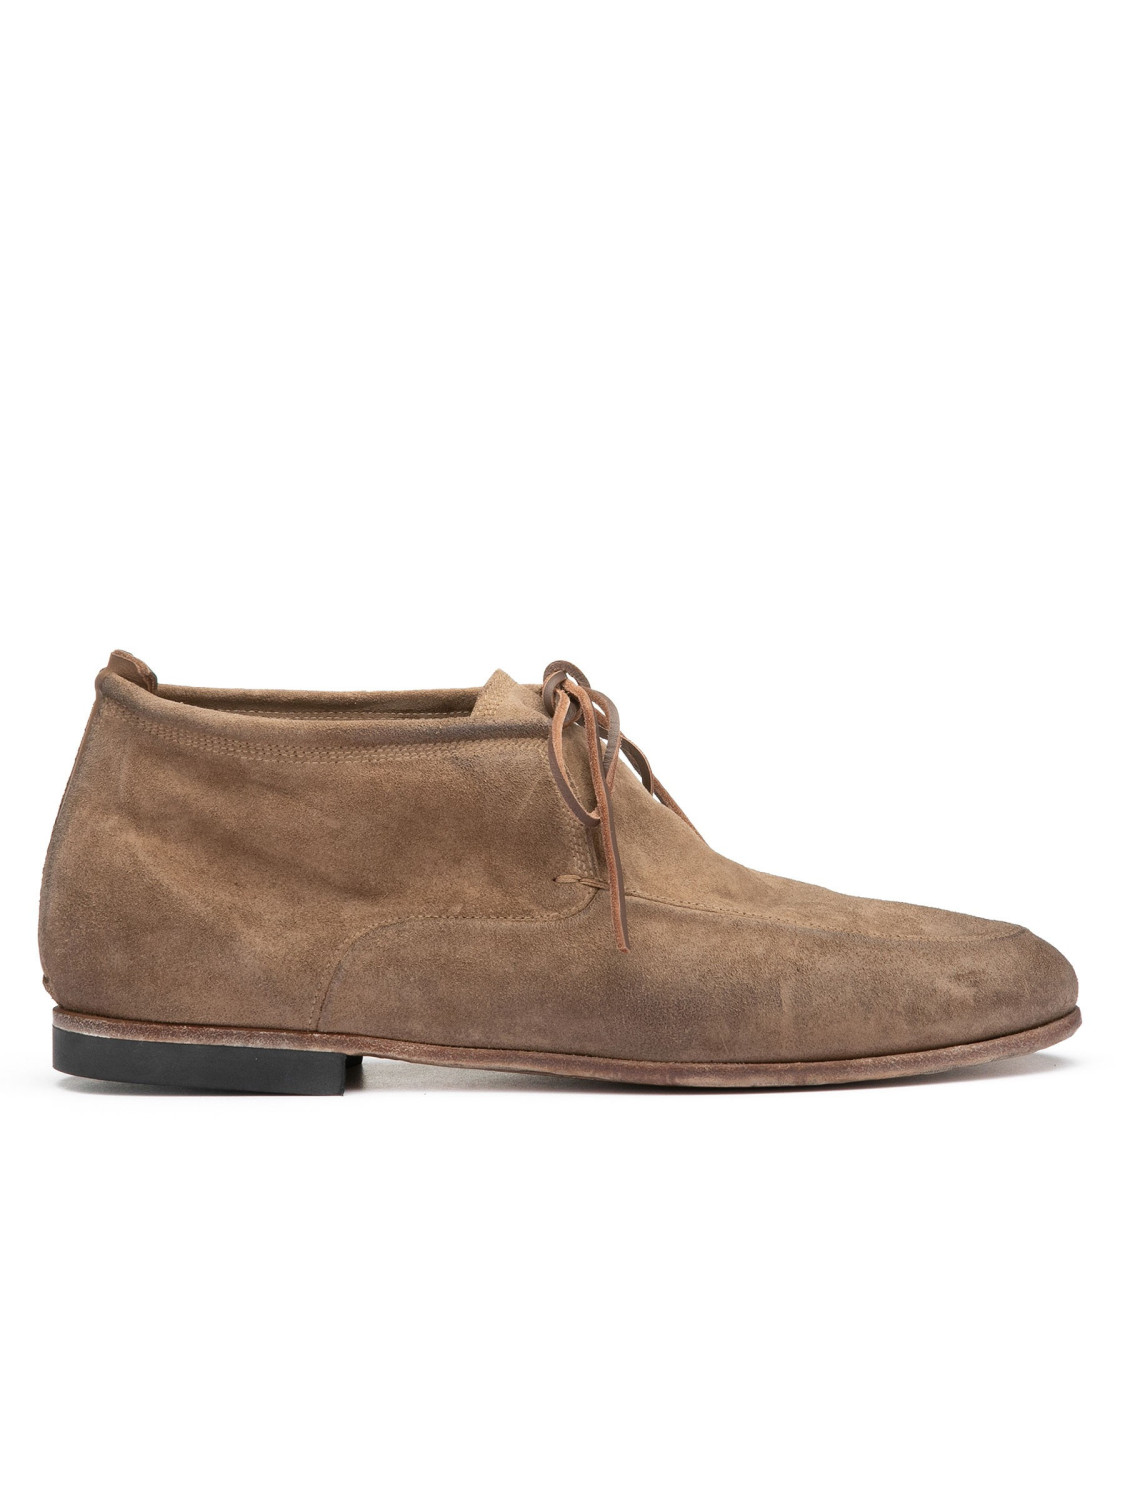 Clay-brown suede chukka booties